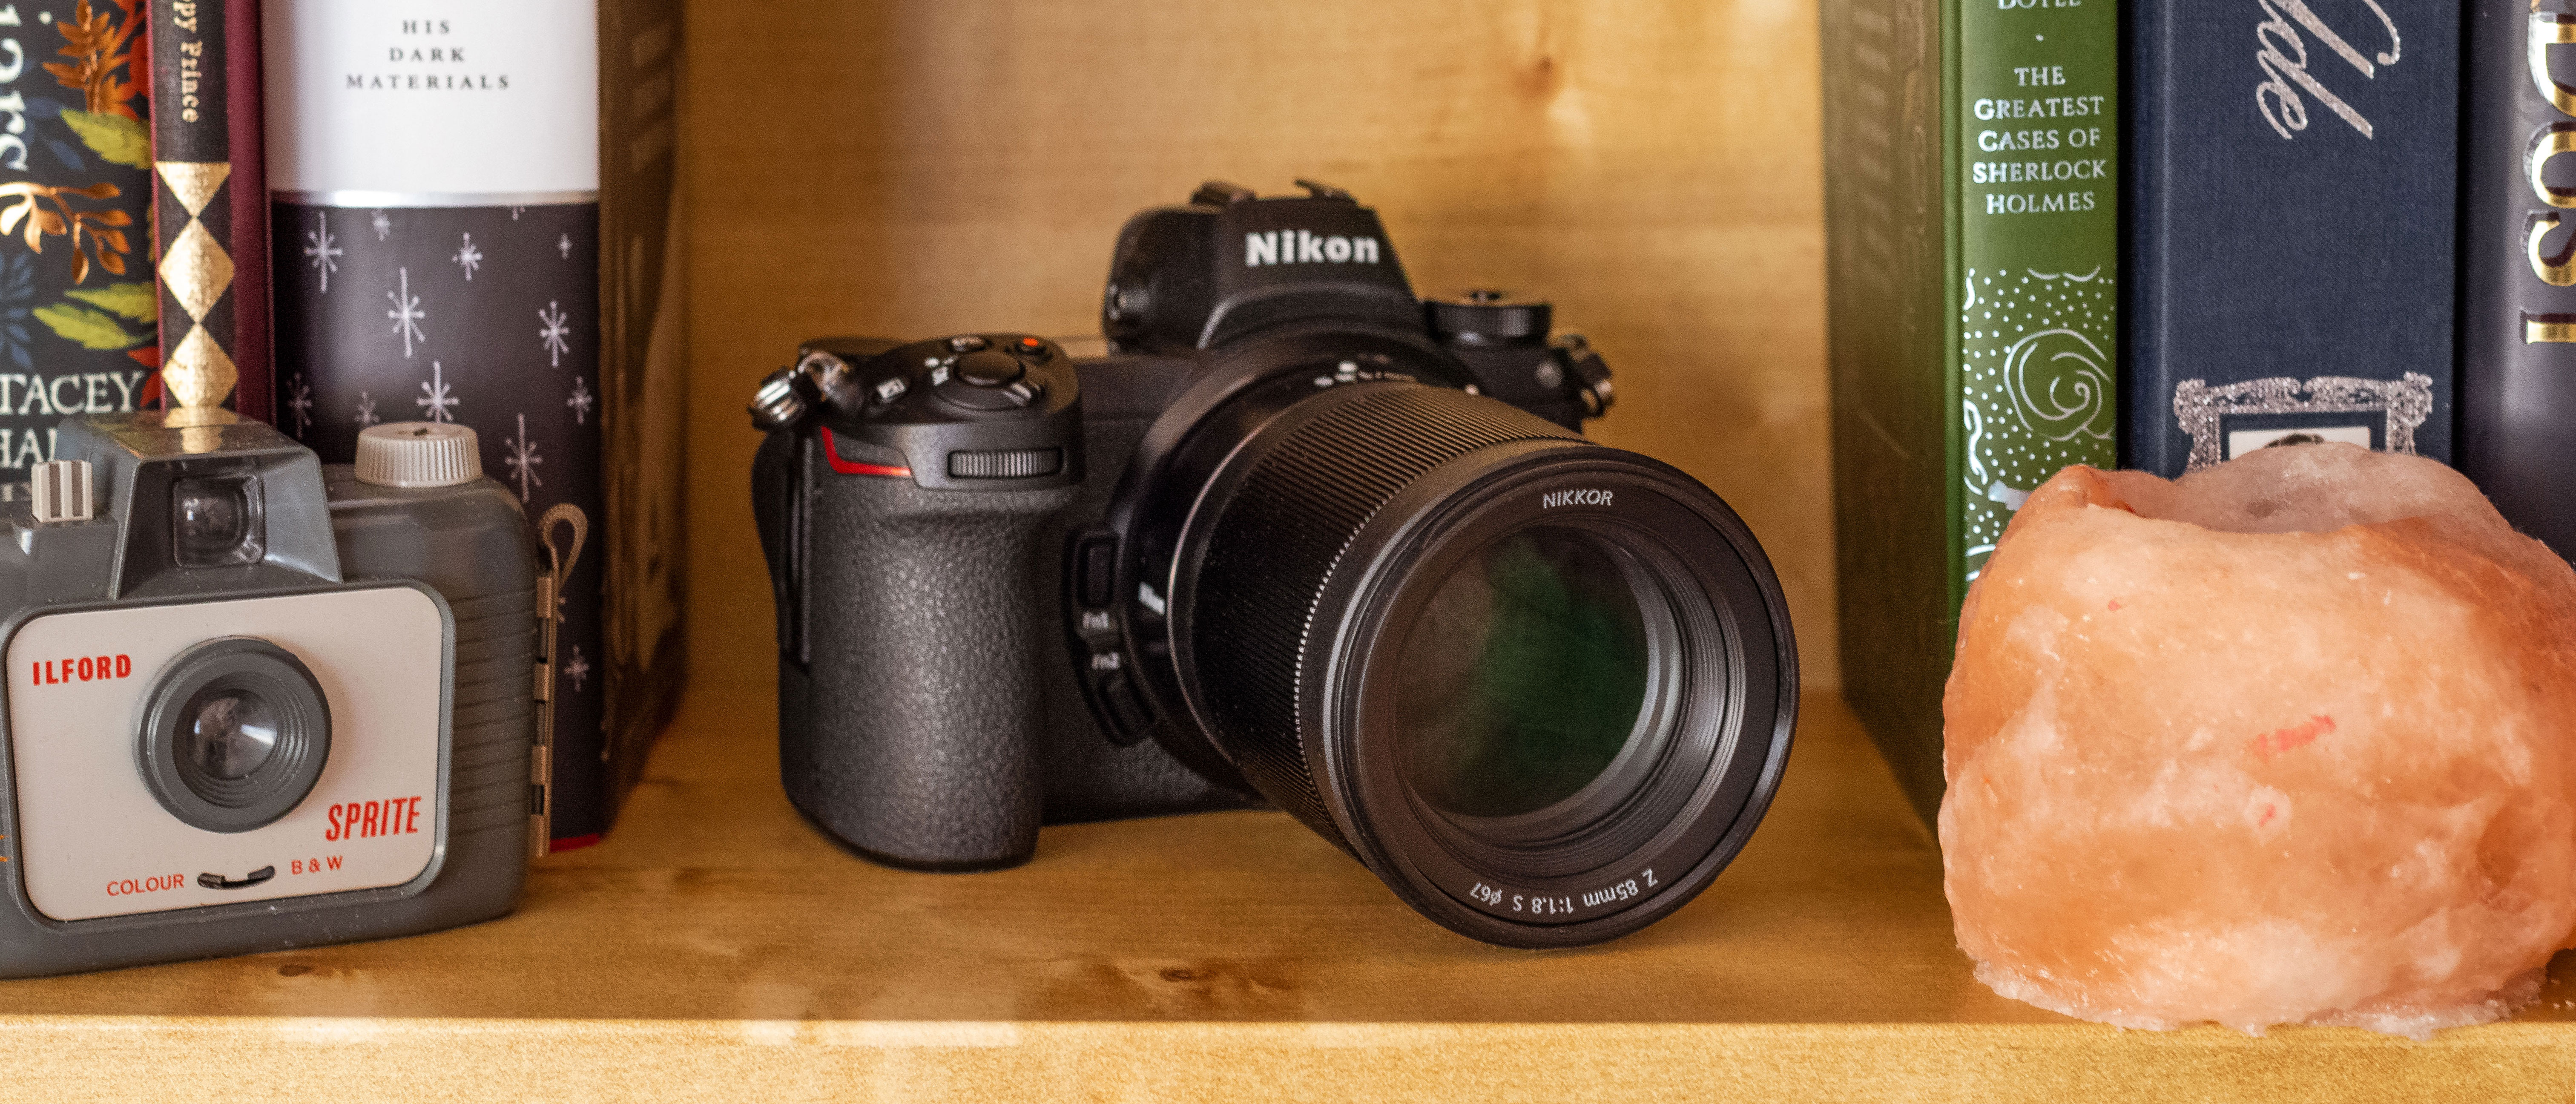 Forge Anesthetic Universal Nikon Z 85mm f/1.8 S review | Digital Camera World